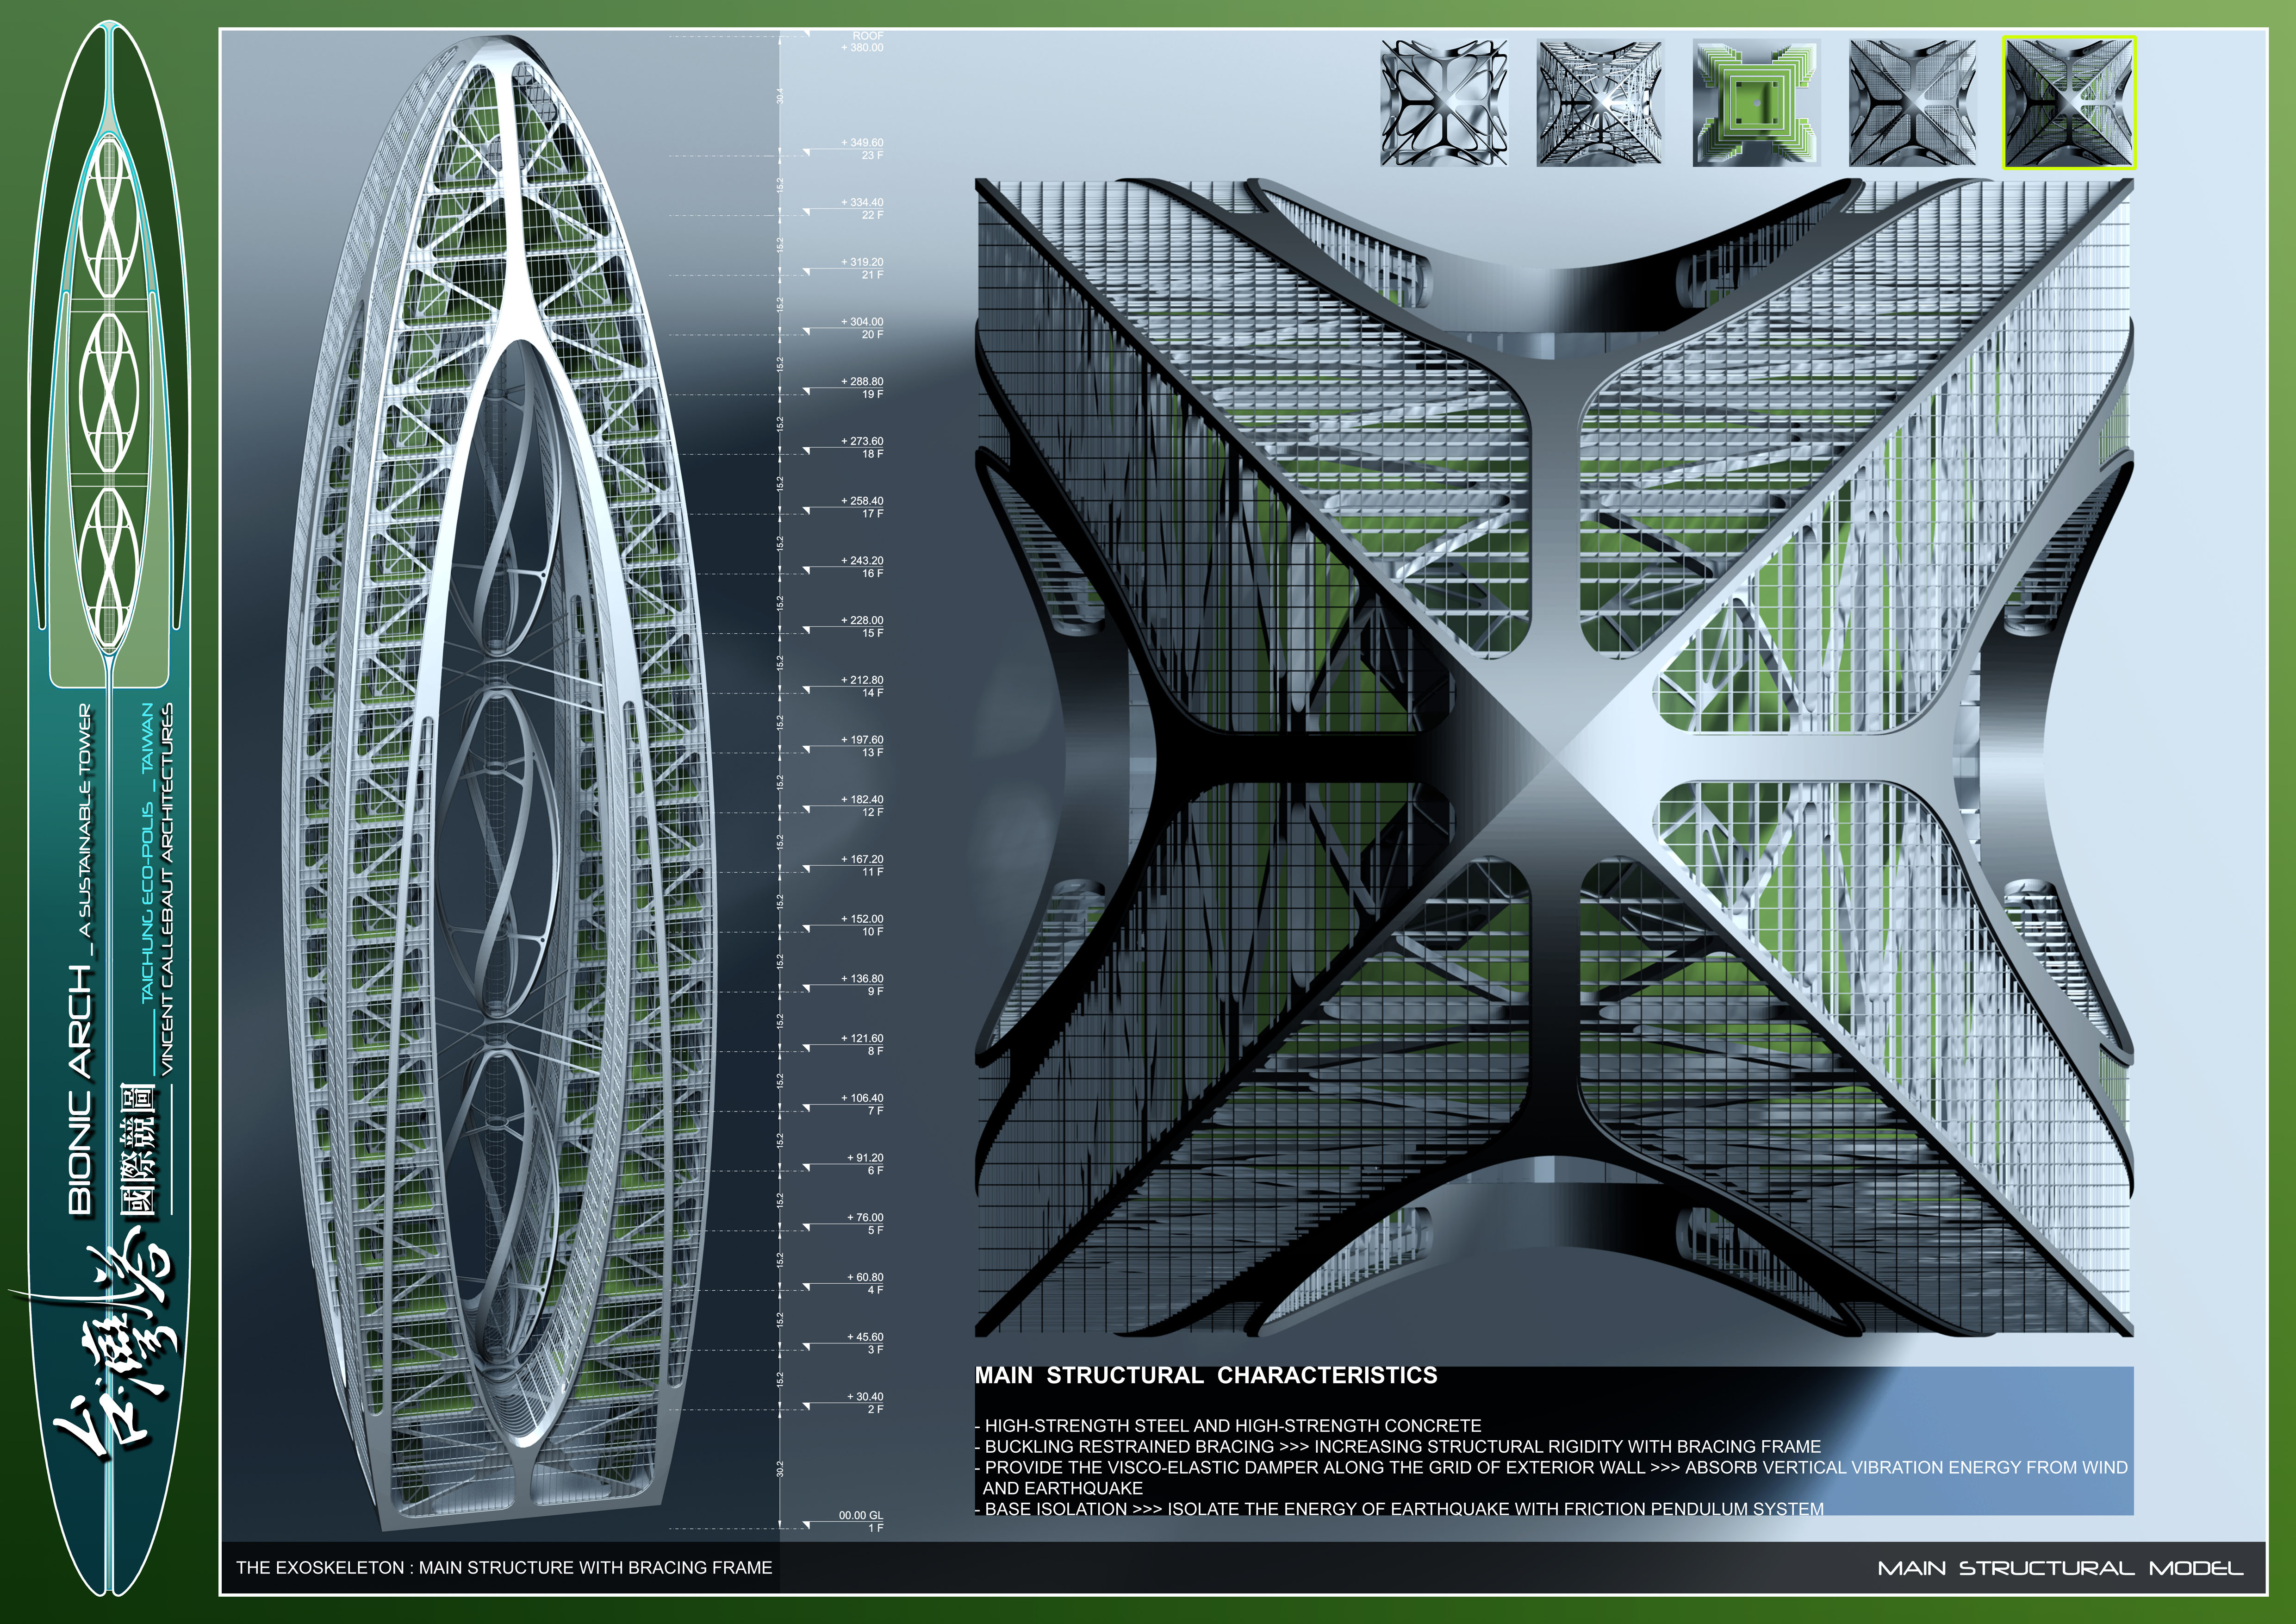 Bionic Arch, A Sustainable Tower by Vincent Callebaut 